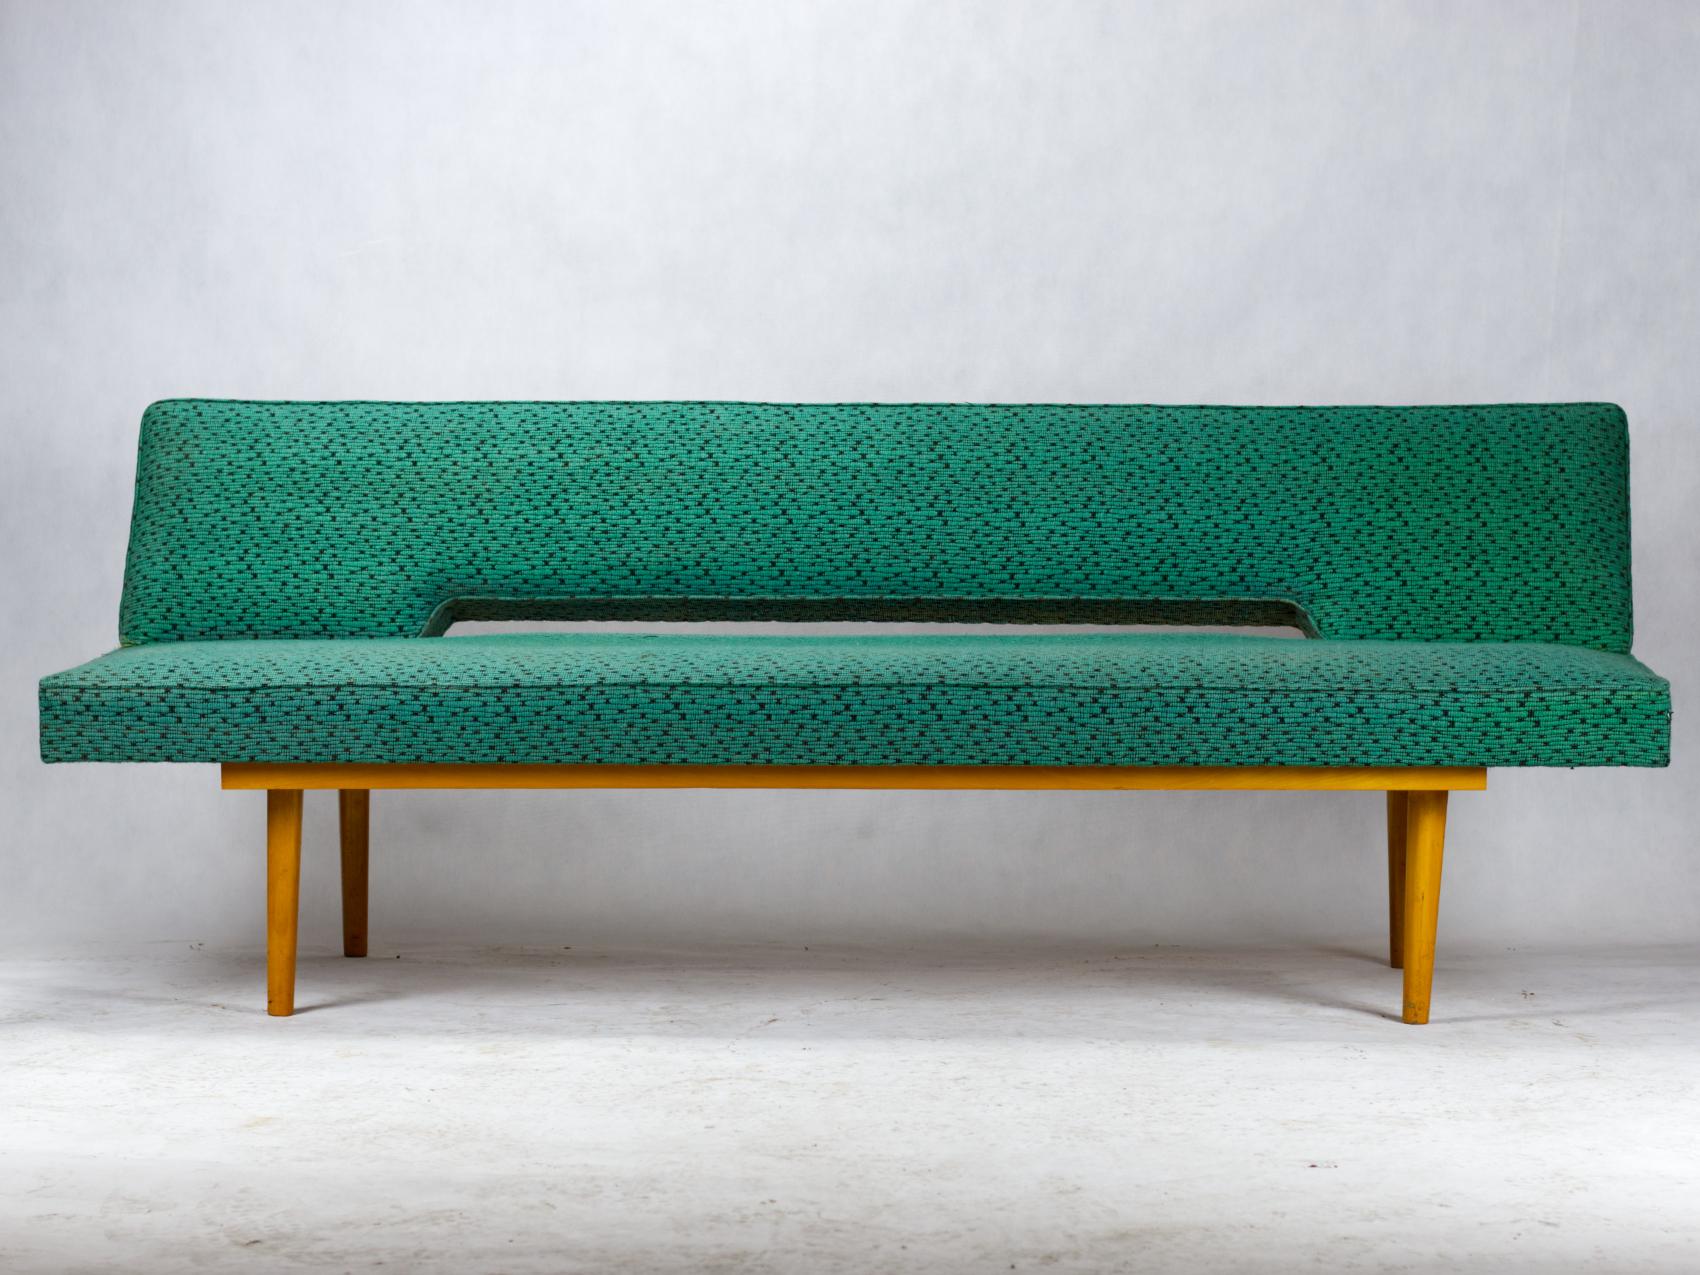 This sofa was designed by Miroslav Navratil in the 1960s for Interier Praha Czechoslovakia. It features a beech frame with the original green fabric. It is easily folded out into a 90 cm wide bed.
Original condition.